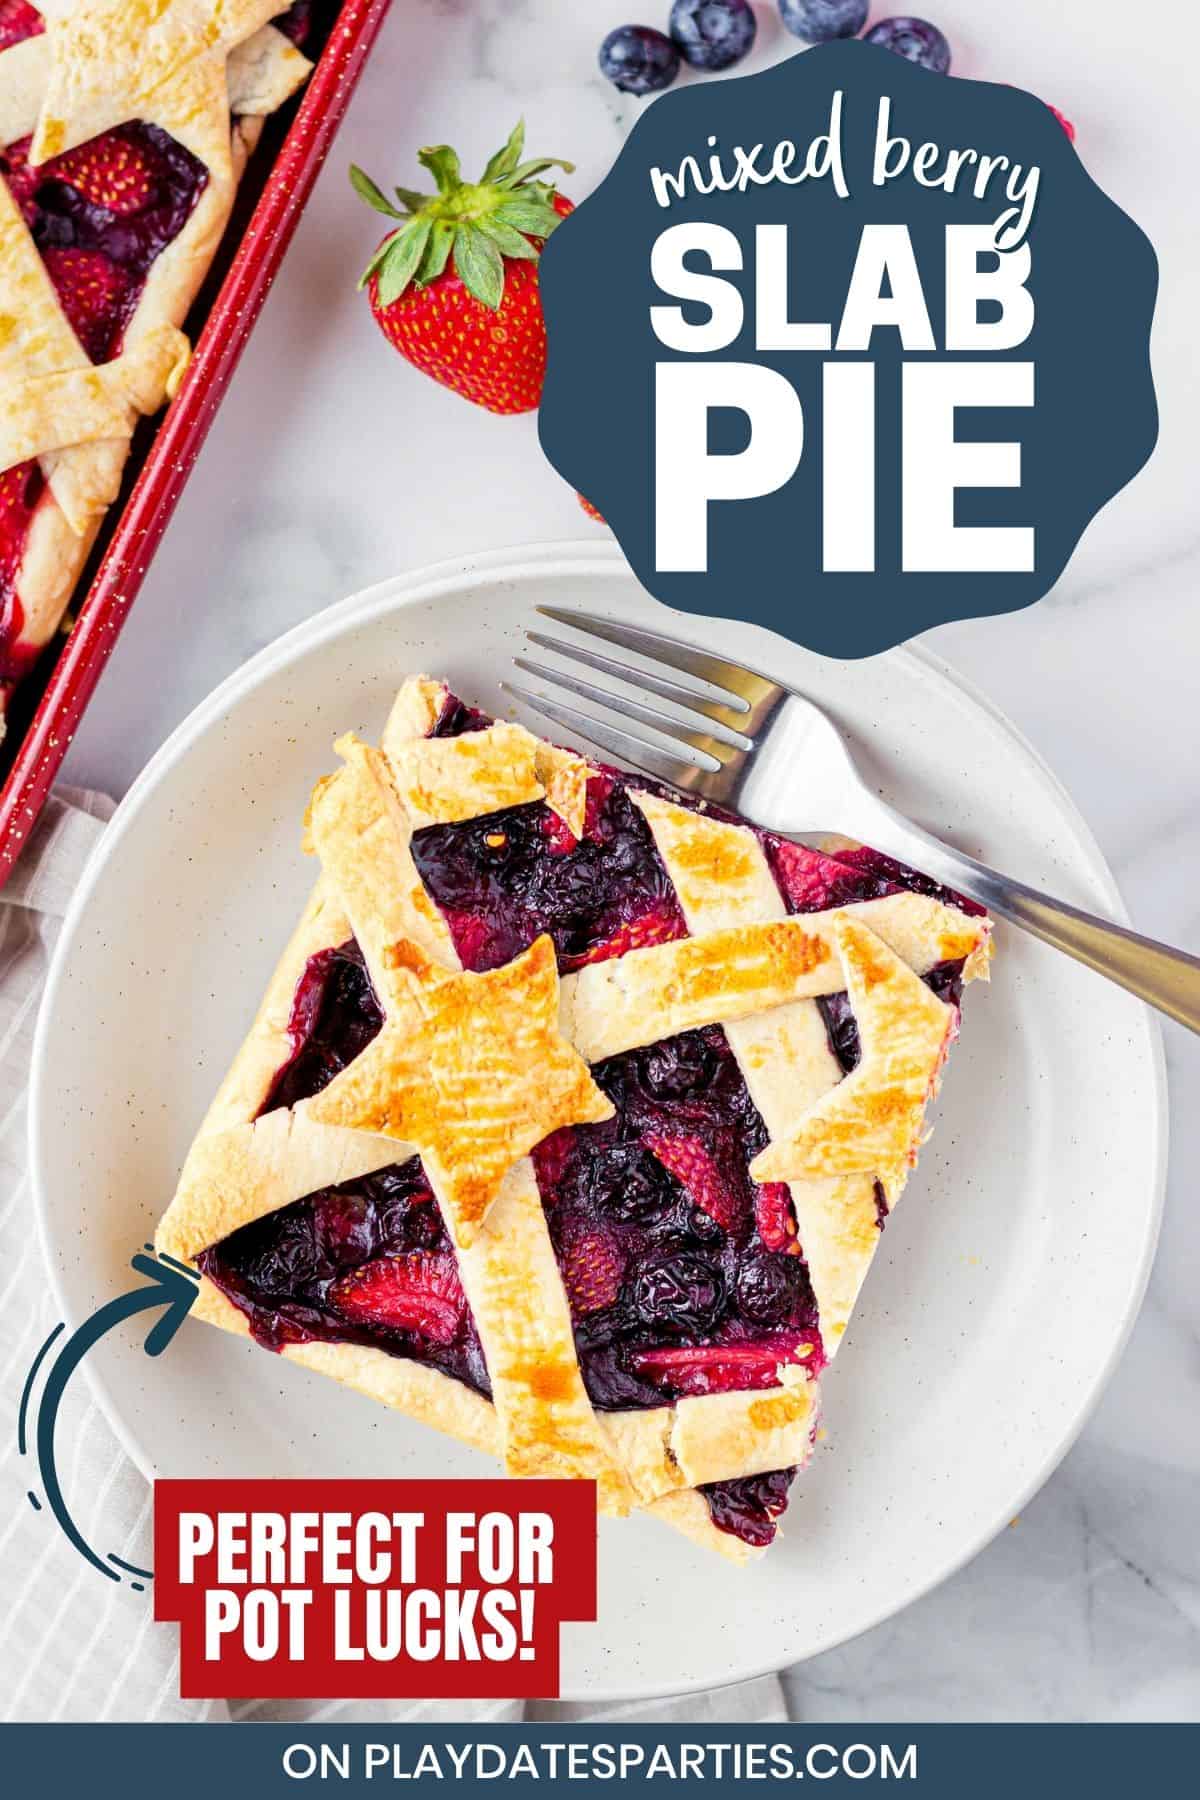 Mixed Berry Slab Pie Pin Image.